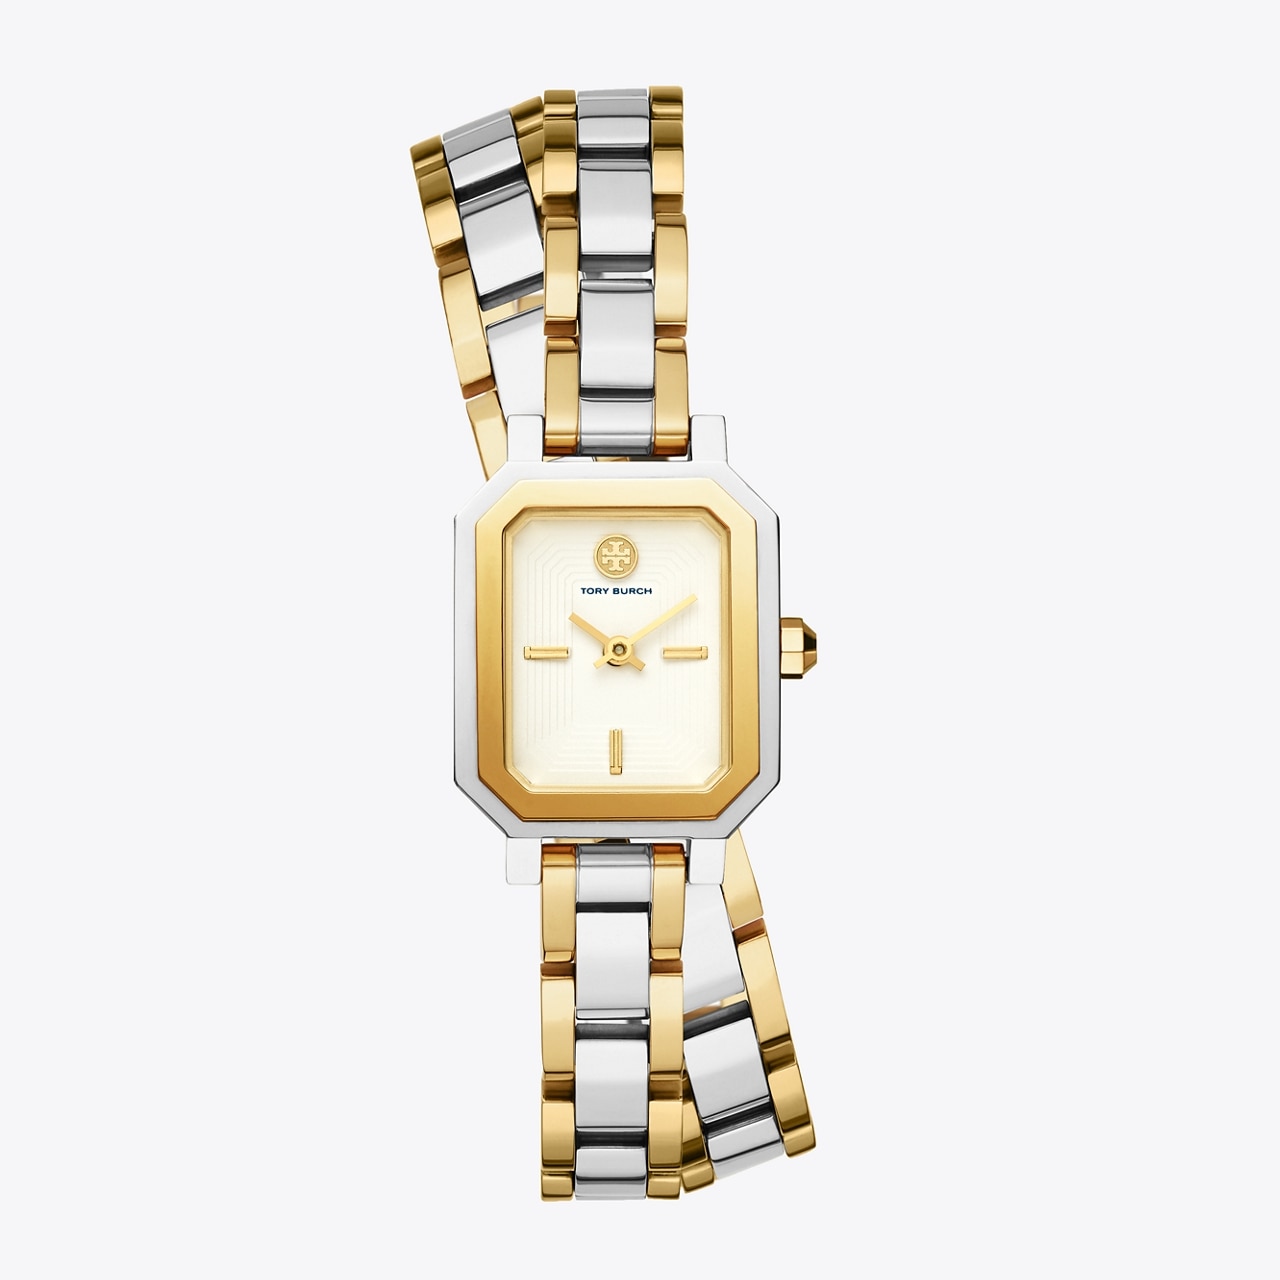 Shop Tory Burch ROBINSON Square Quartz Watches Stainless Office Style  Elegant Style (TBW1507, TBW1506) by ALOHAMALL